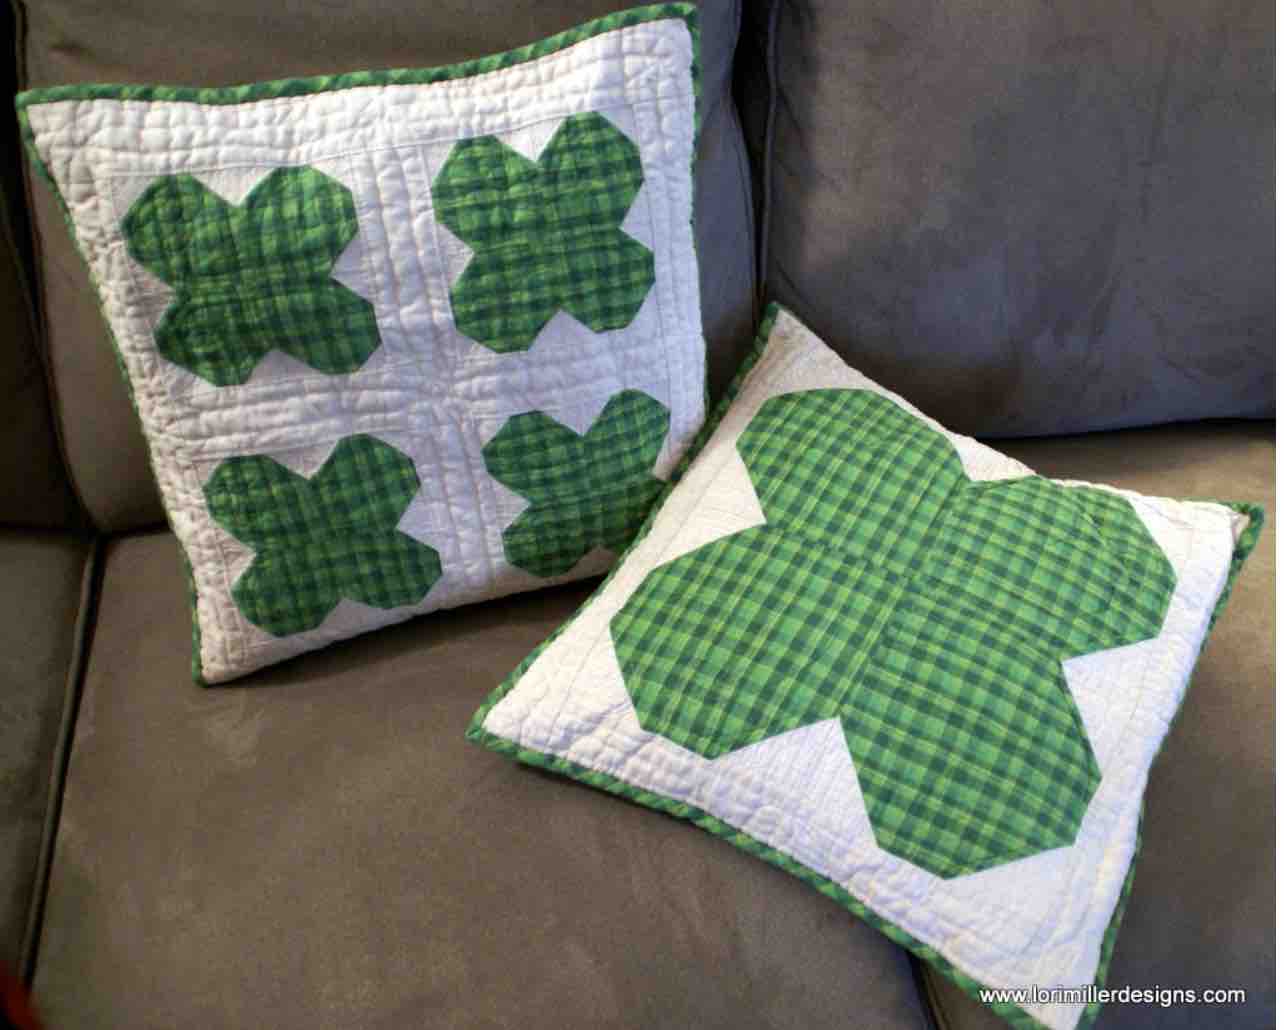 Two square pillows on a couch. One pillow has four quilted shamrocks and the other has one large quilted shamrock.